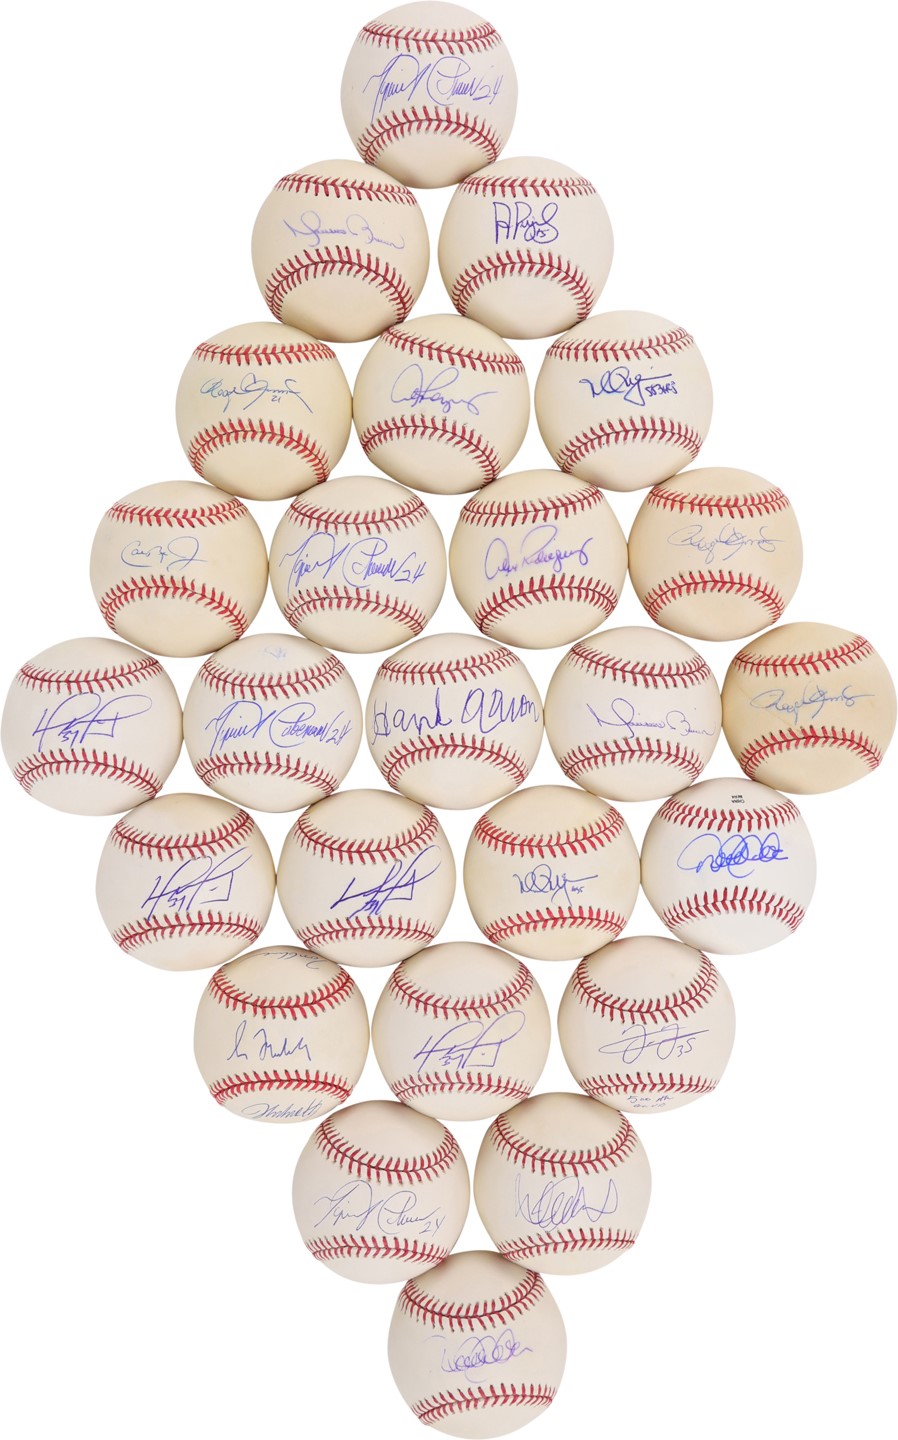 The Cito Gaston Collection - Hall of Famers and Stars Signed Baseballs from The Cito Gaston Collection (159)